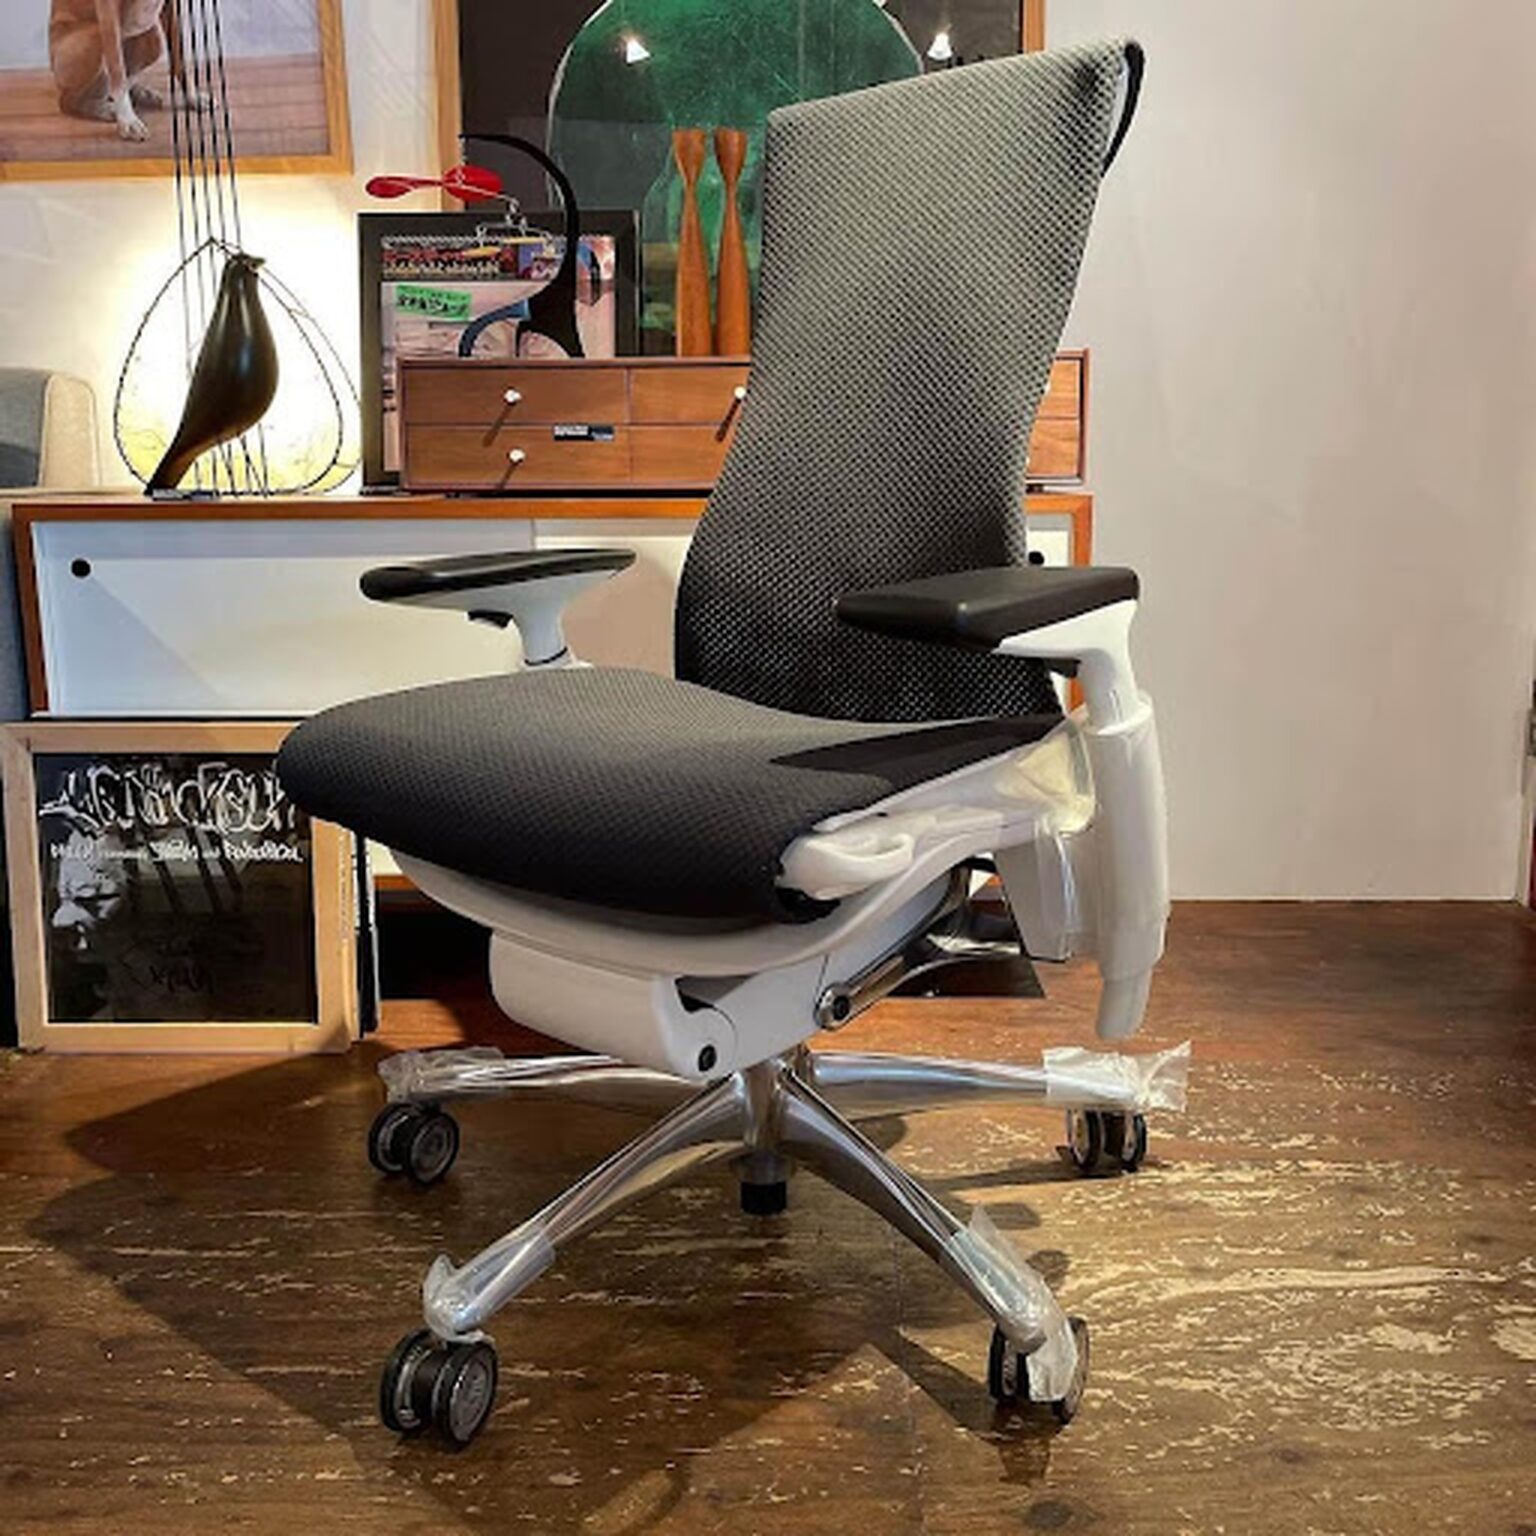 Working for long hours like 8-12h daily can be really tough on your spine. Here's why we think Embody and Gesture chairs may be the answer!